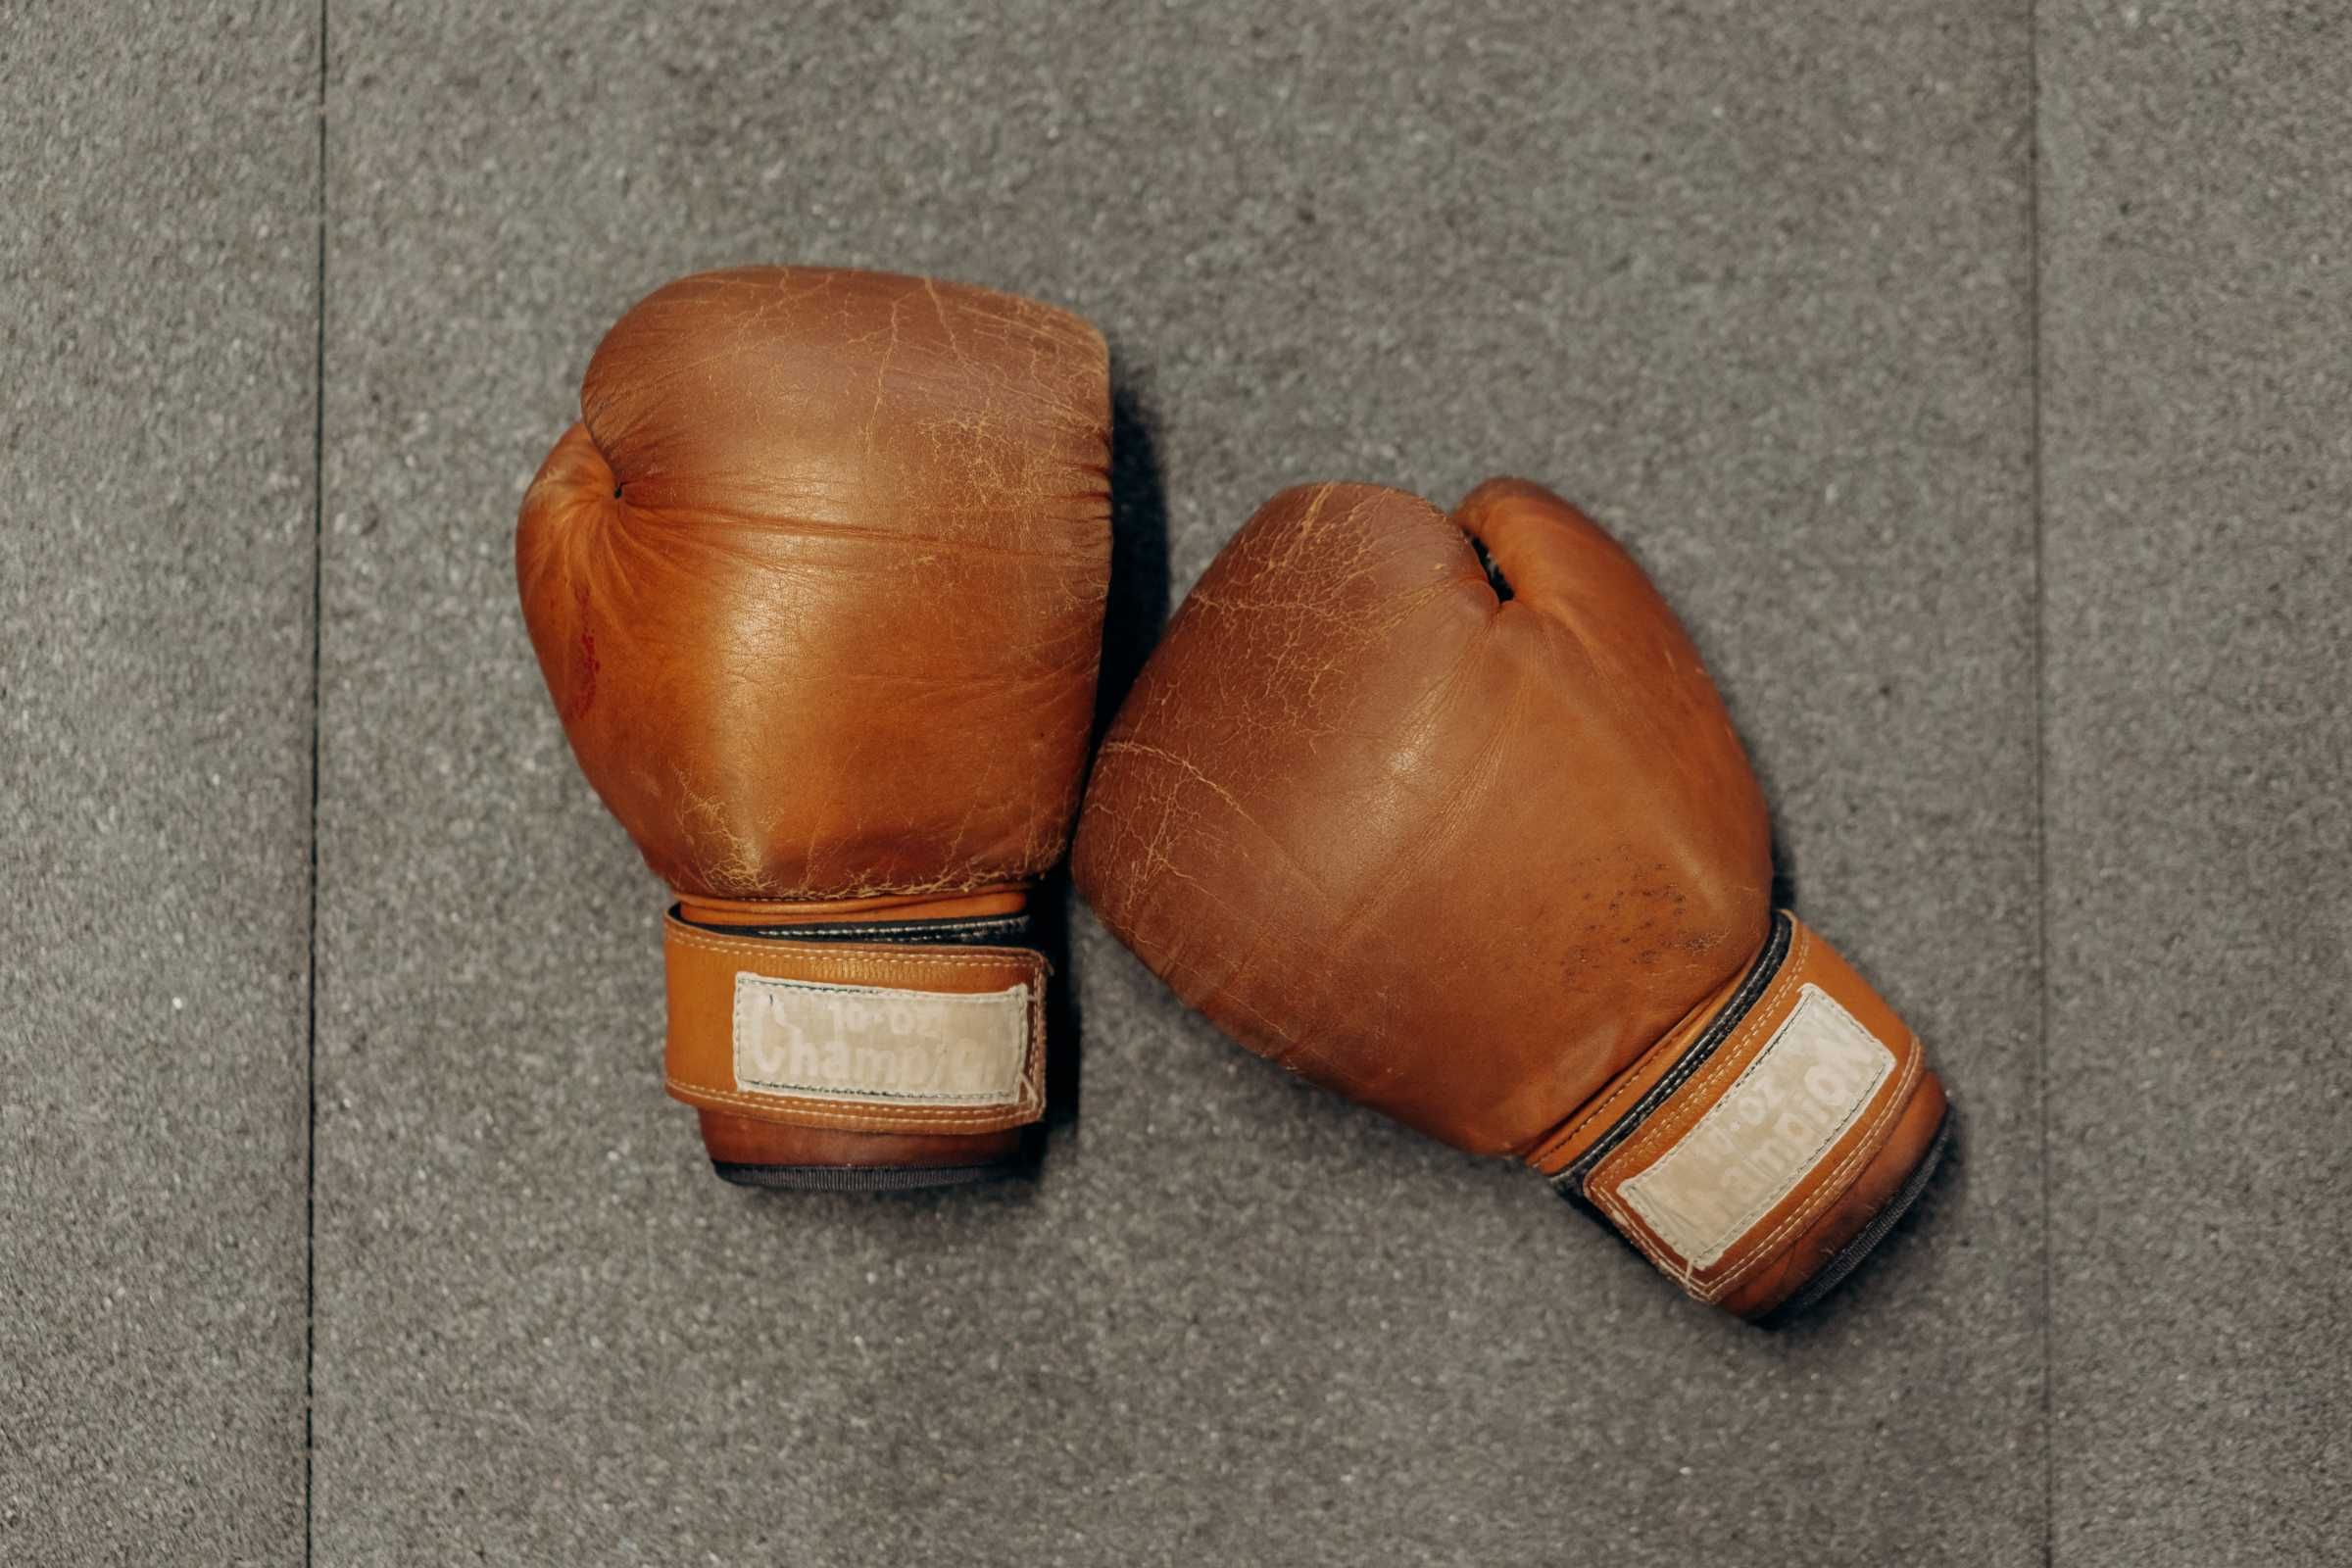 pair of well-used boxing gloves on the floor